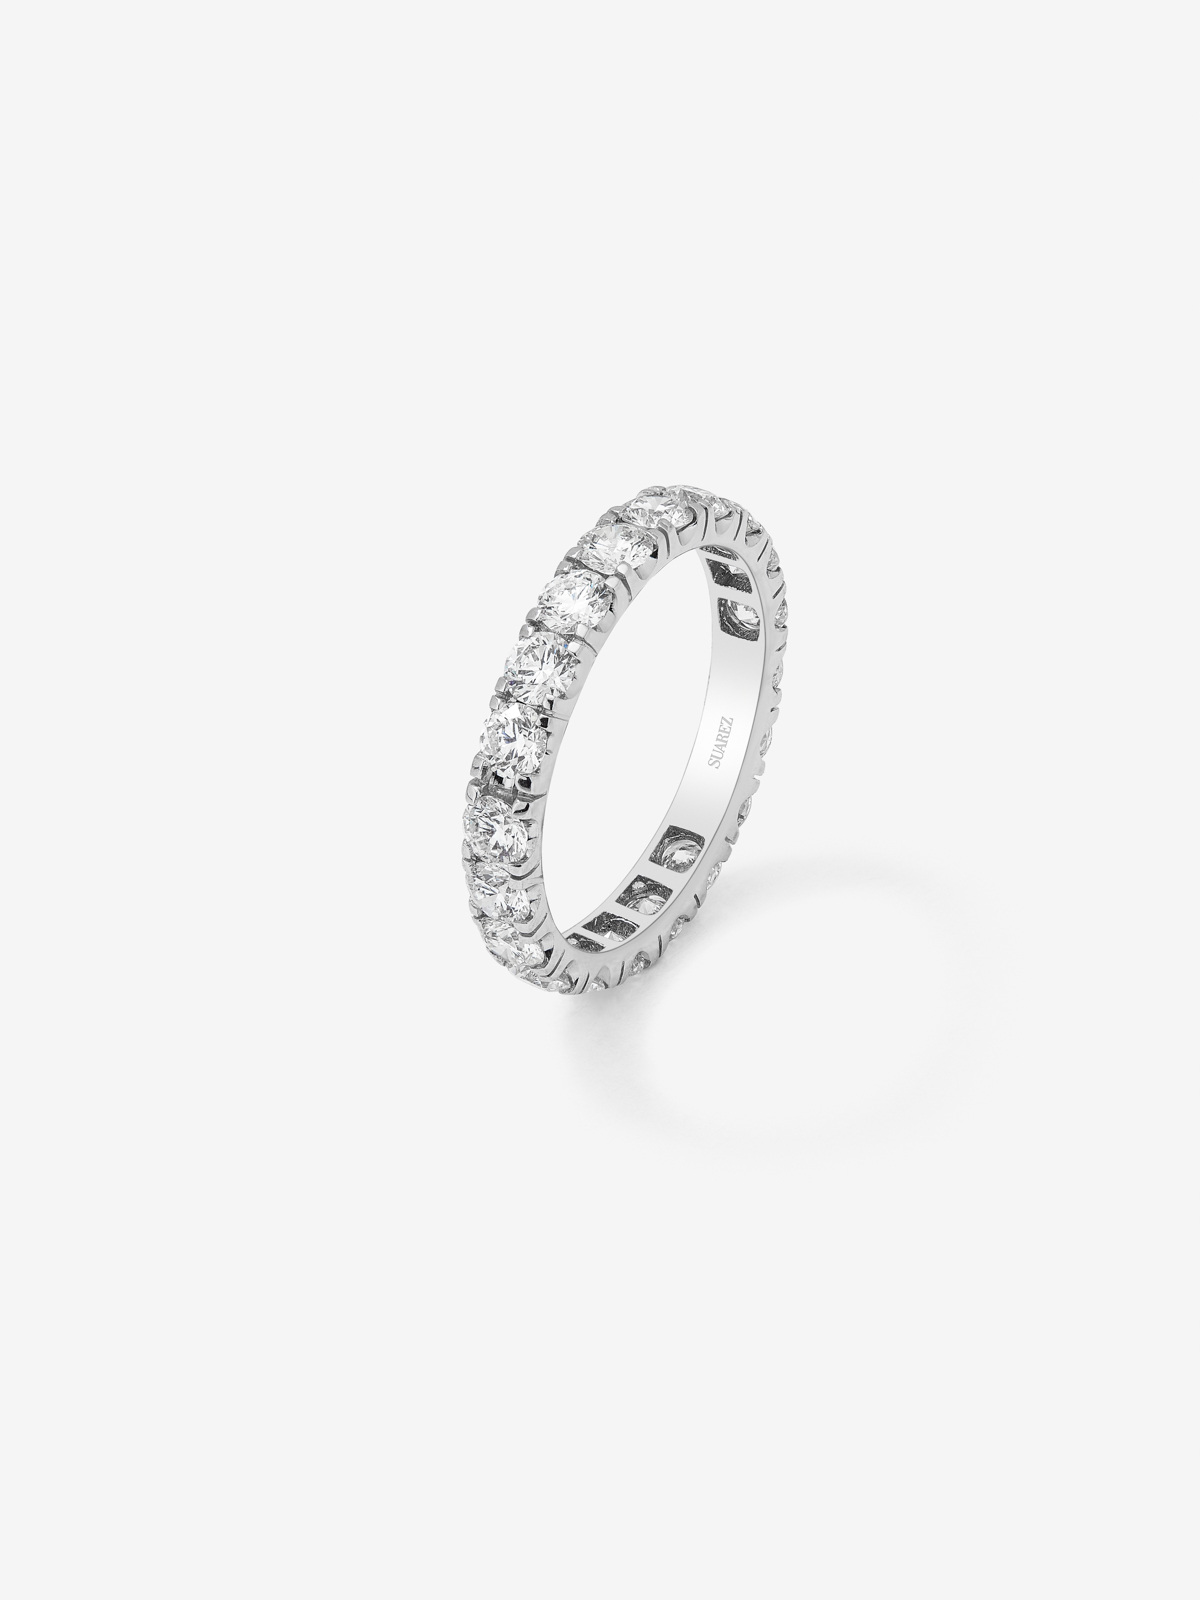 18K White Gold Commitment Alliance ring with claw diamonds